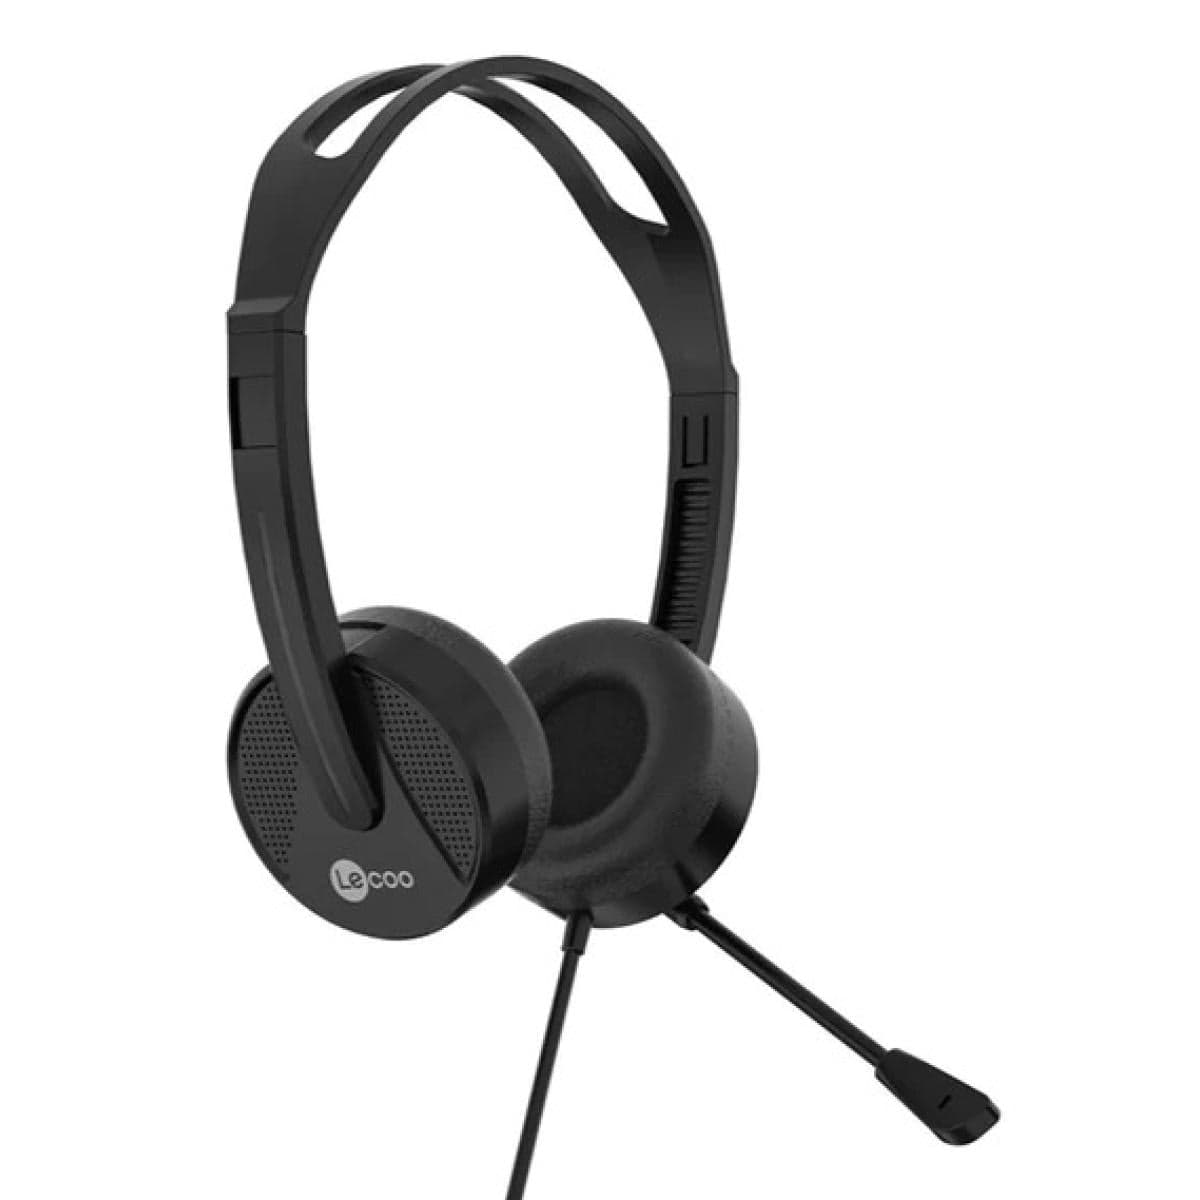 LENOVO GAMING HEADSET LENOVO Lecoo HT106 Wired Headset- One Pin